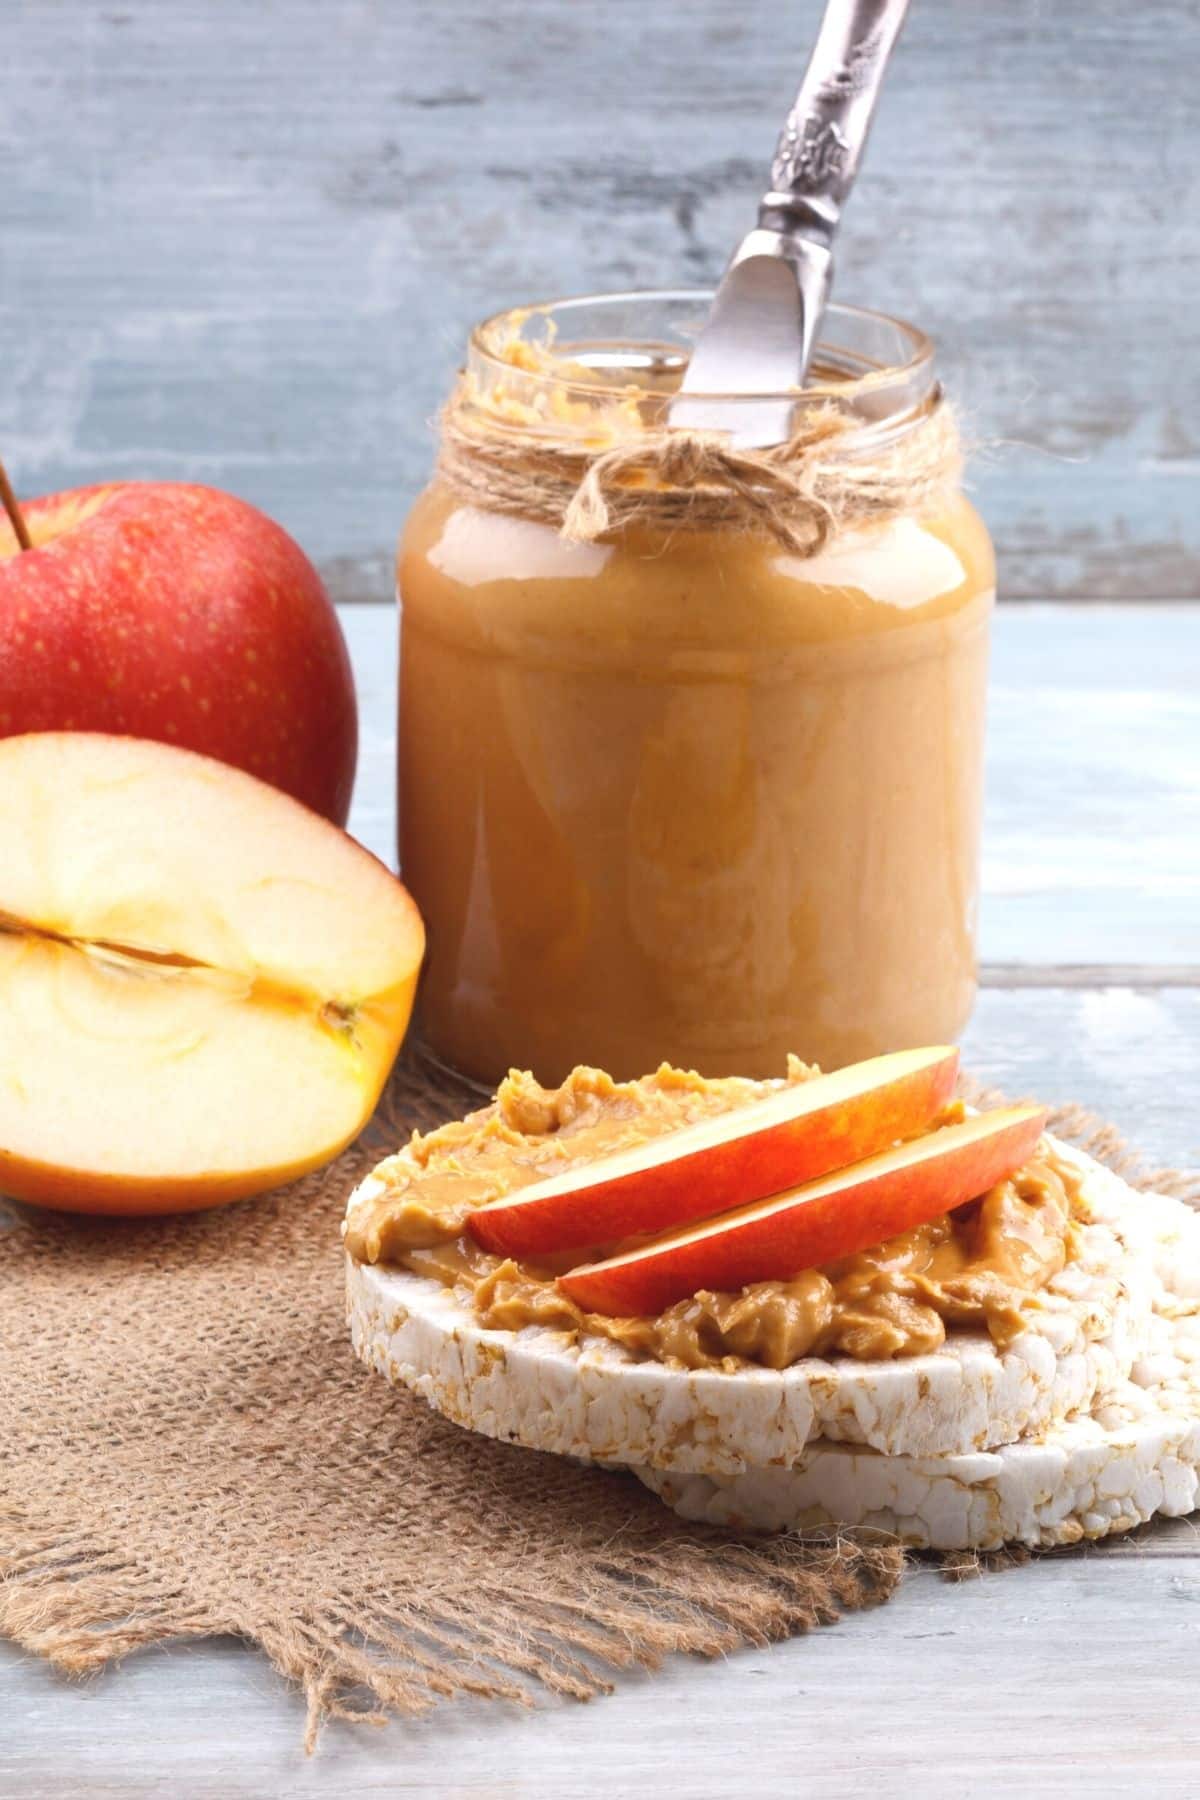 rice cakes with peanut butter and apple.